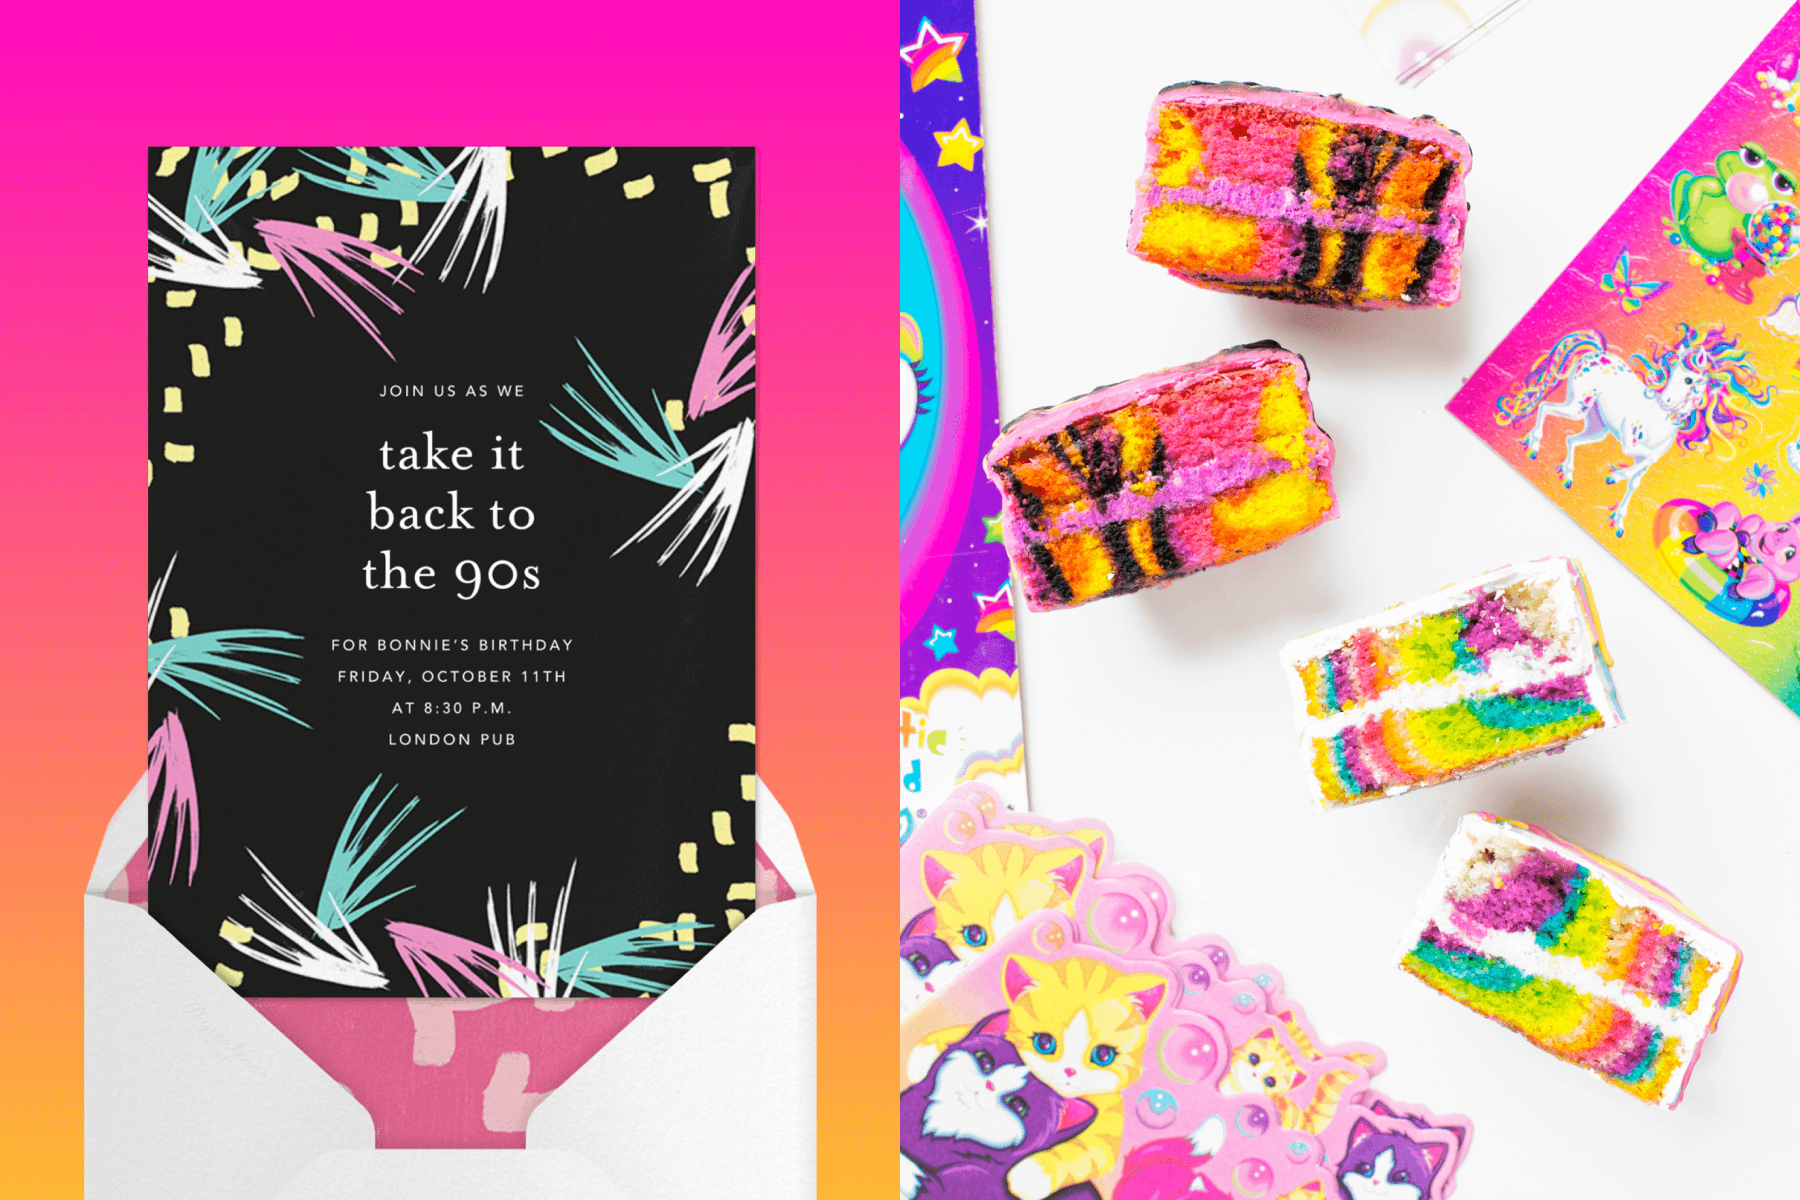 Alt text, left: A black invitation with faded neon brushstrokes and confetti on the border. Right: Rainbow Lisa Frank-inspired cake snacks.